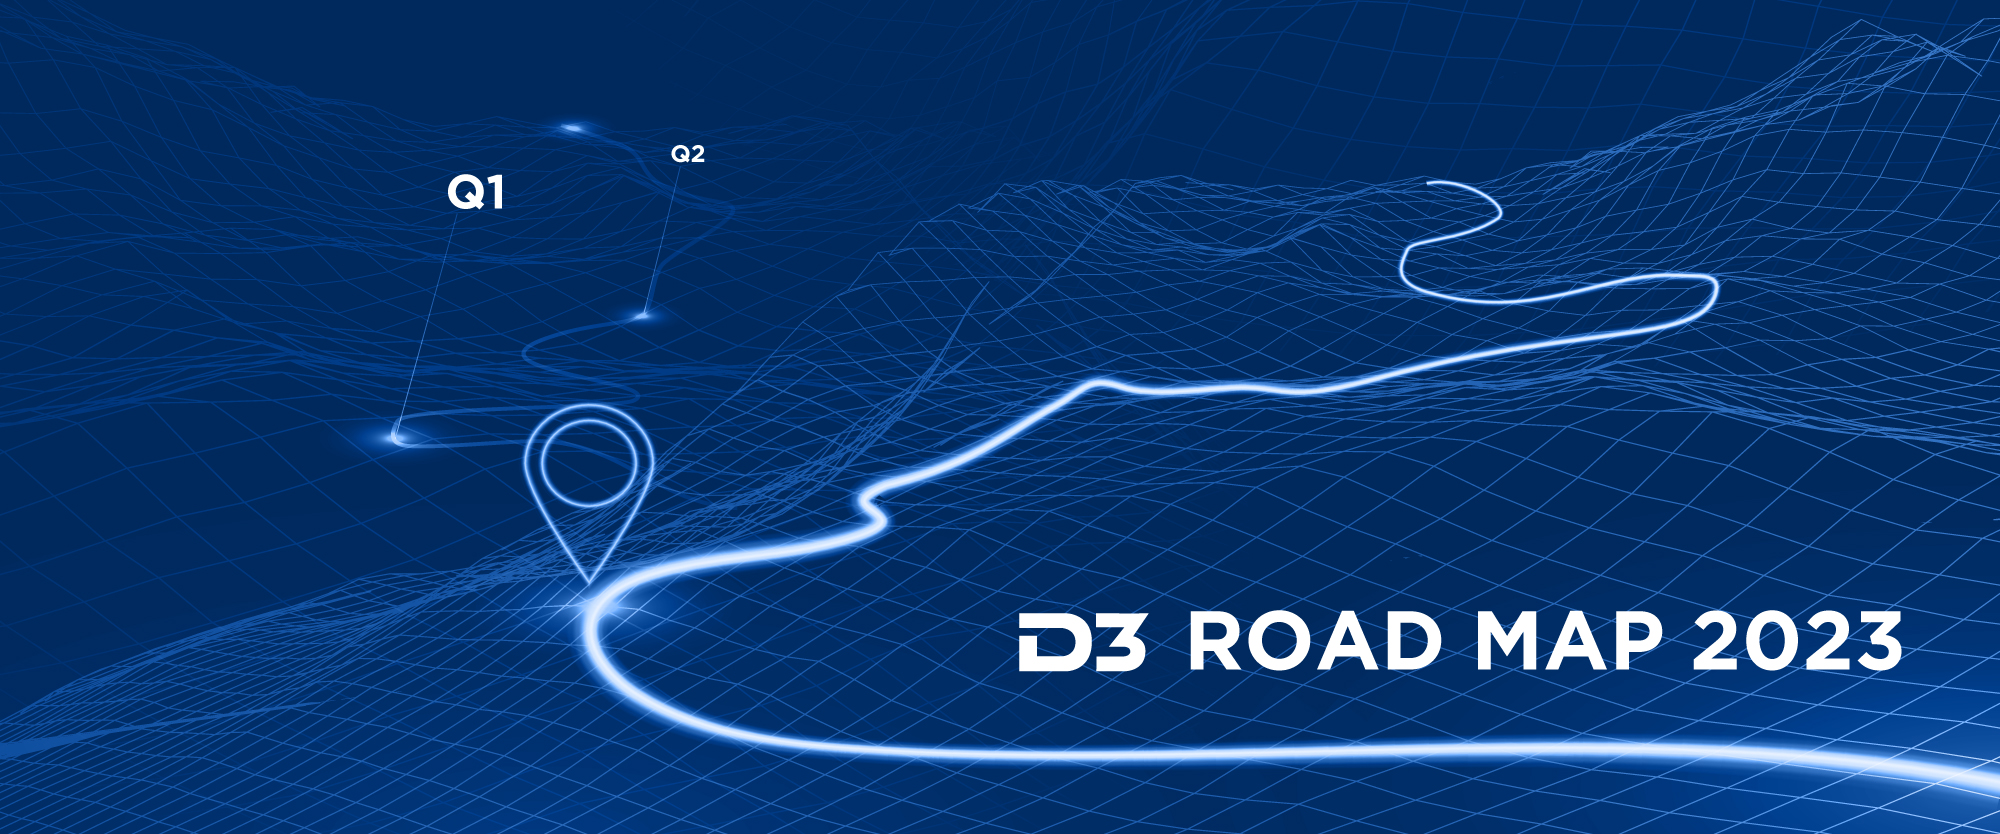 D3’s Roadmap Highlights for 2023: Machine Learning and More